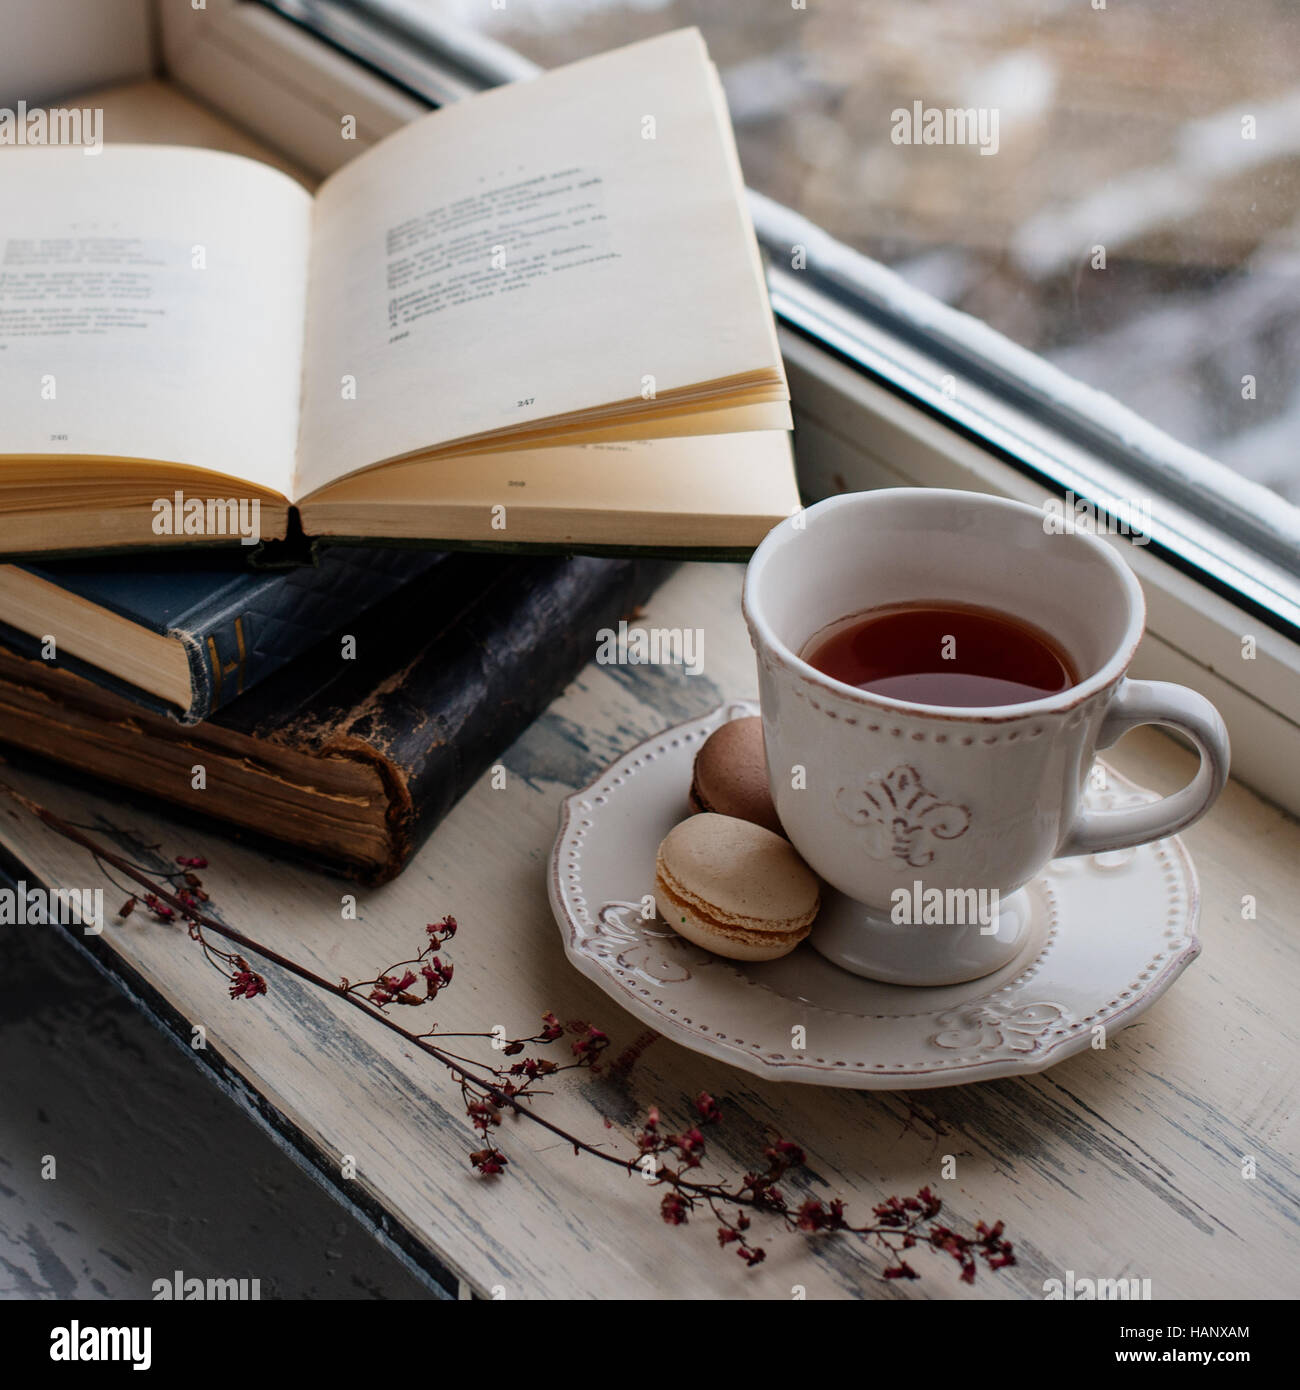 https://c8.alamy.com/comp/HANXAM/cozy-winter-still-life-cup-of-hot-coffee-and-opened-book-on-vintage-HANXAM.jpg